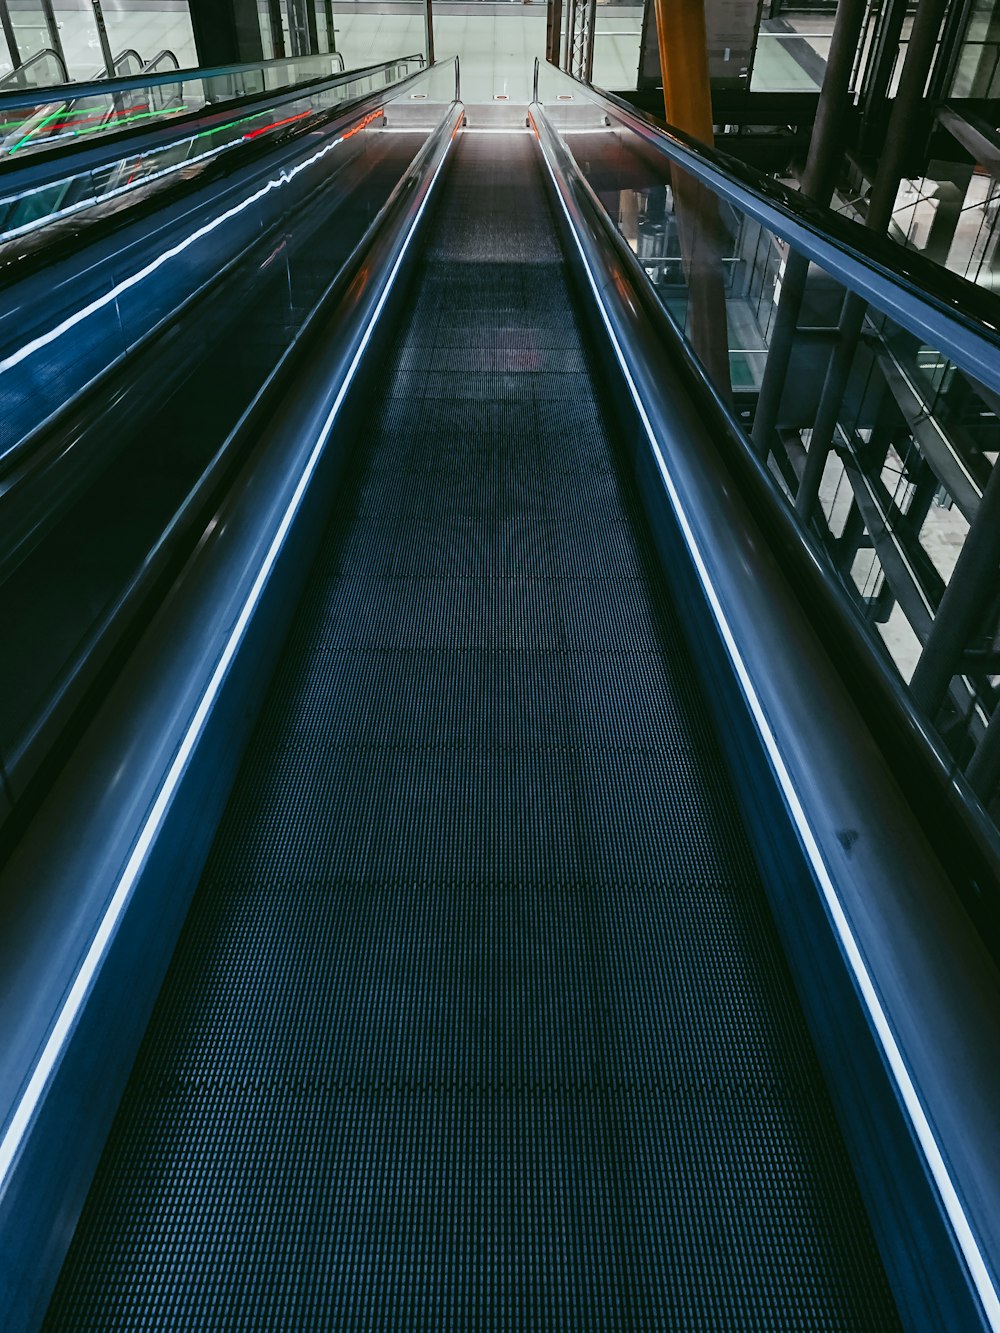 a view of an escalator in a train station